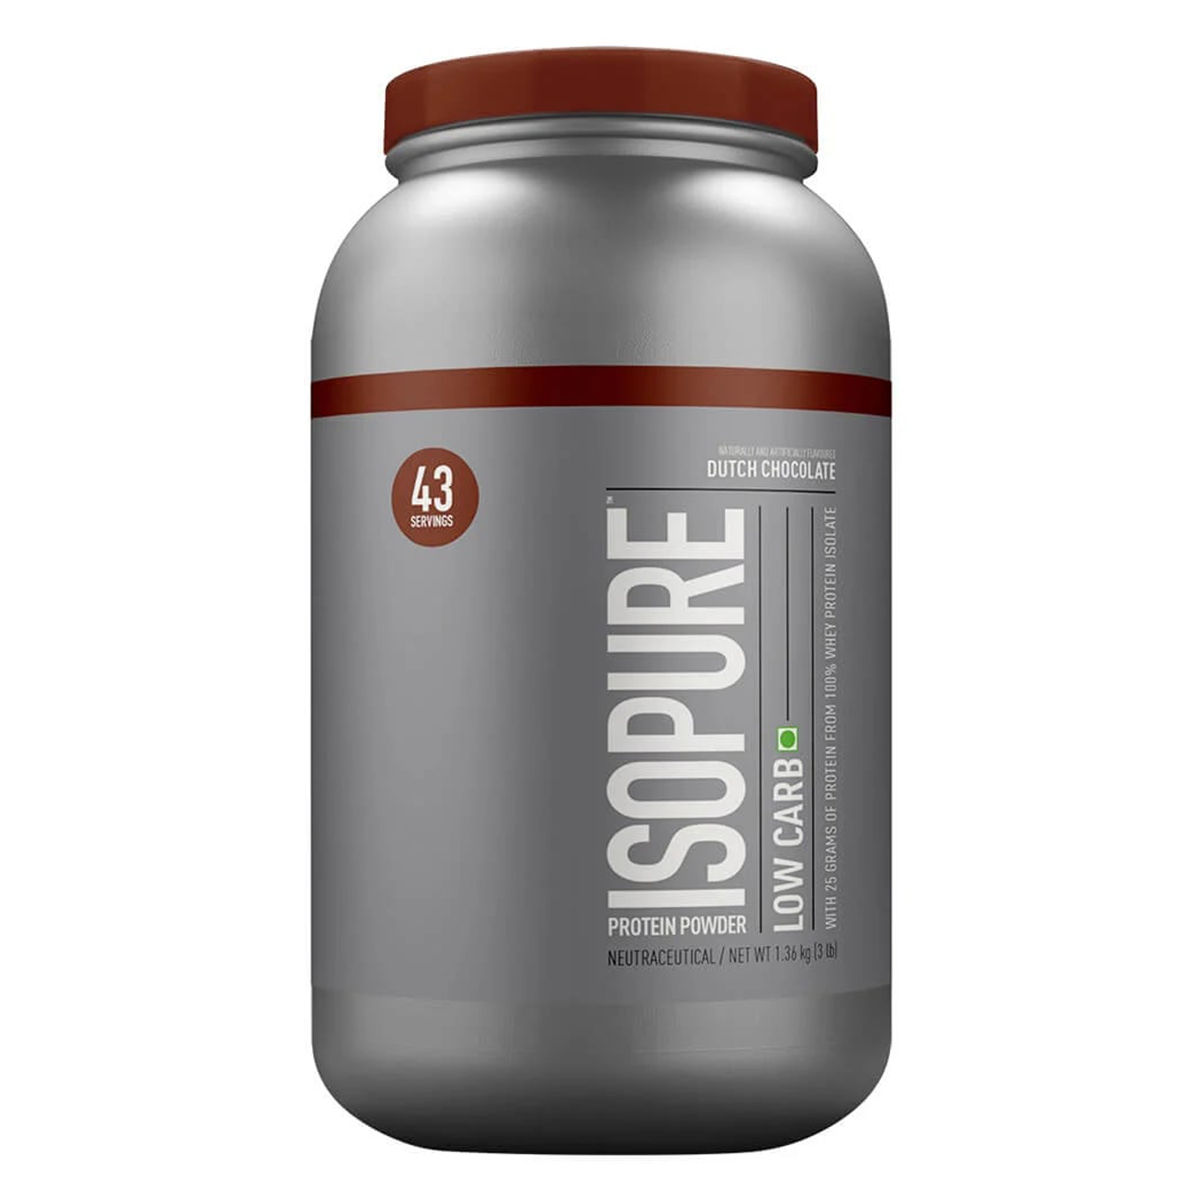 Buy Isopure Low Carb Dutch Chocolate Flavour Protein Powder, 3 lb Online